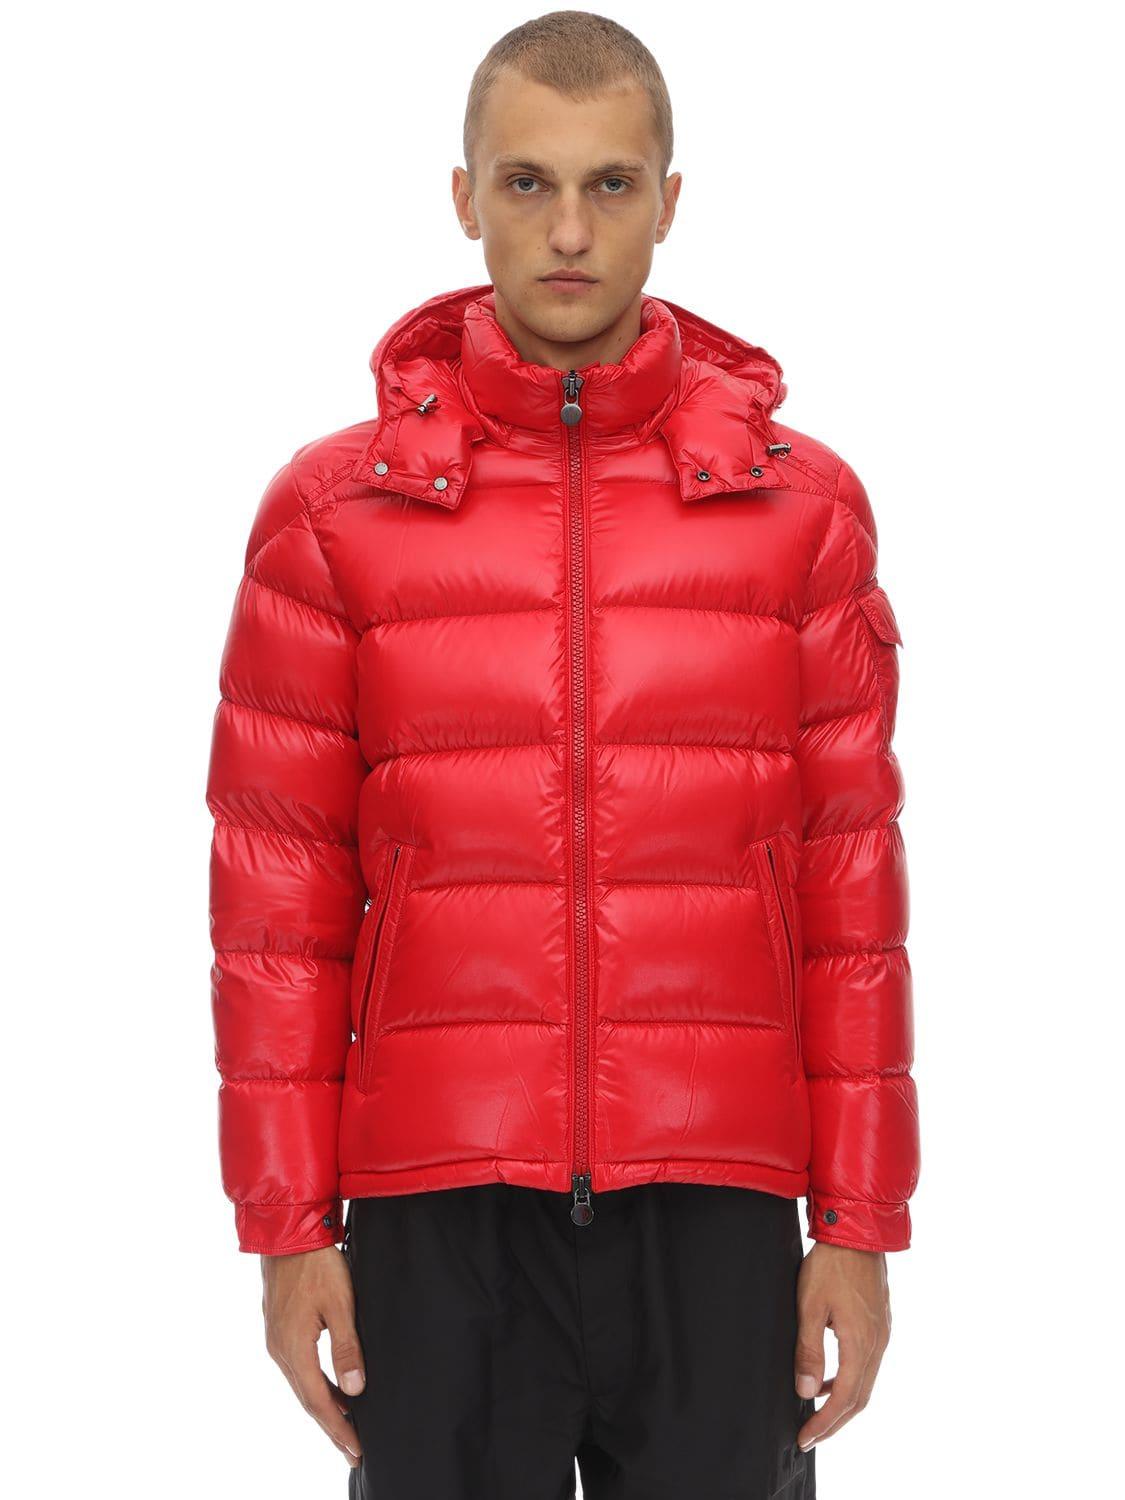 Moncler Synthetic Maya Down Jacket in Red for Men - Lyst